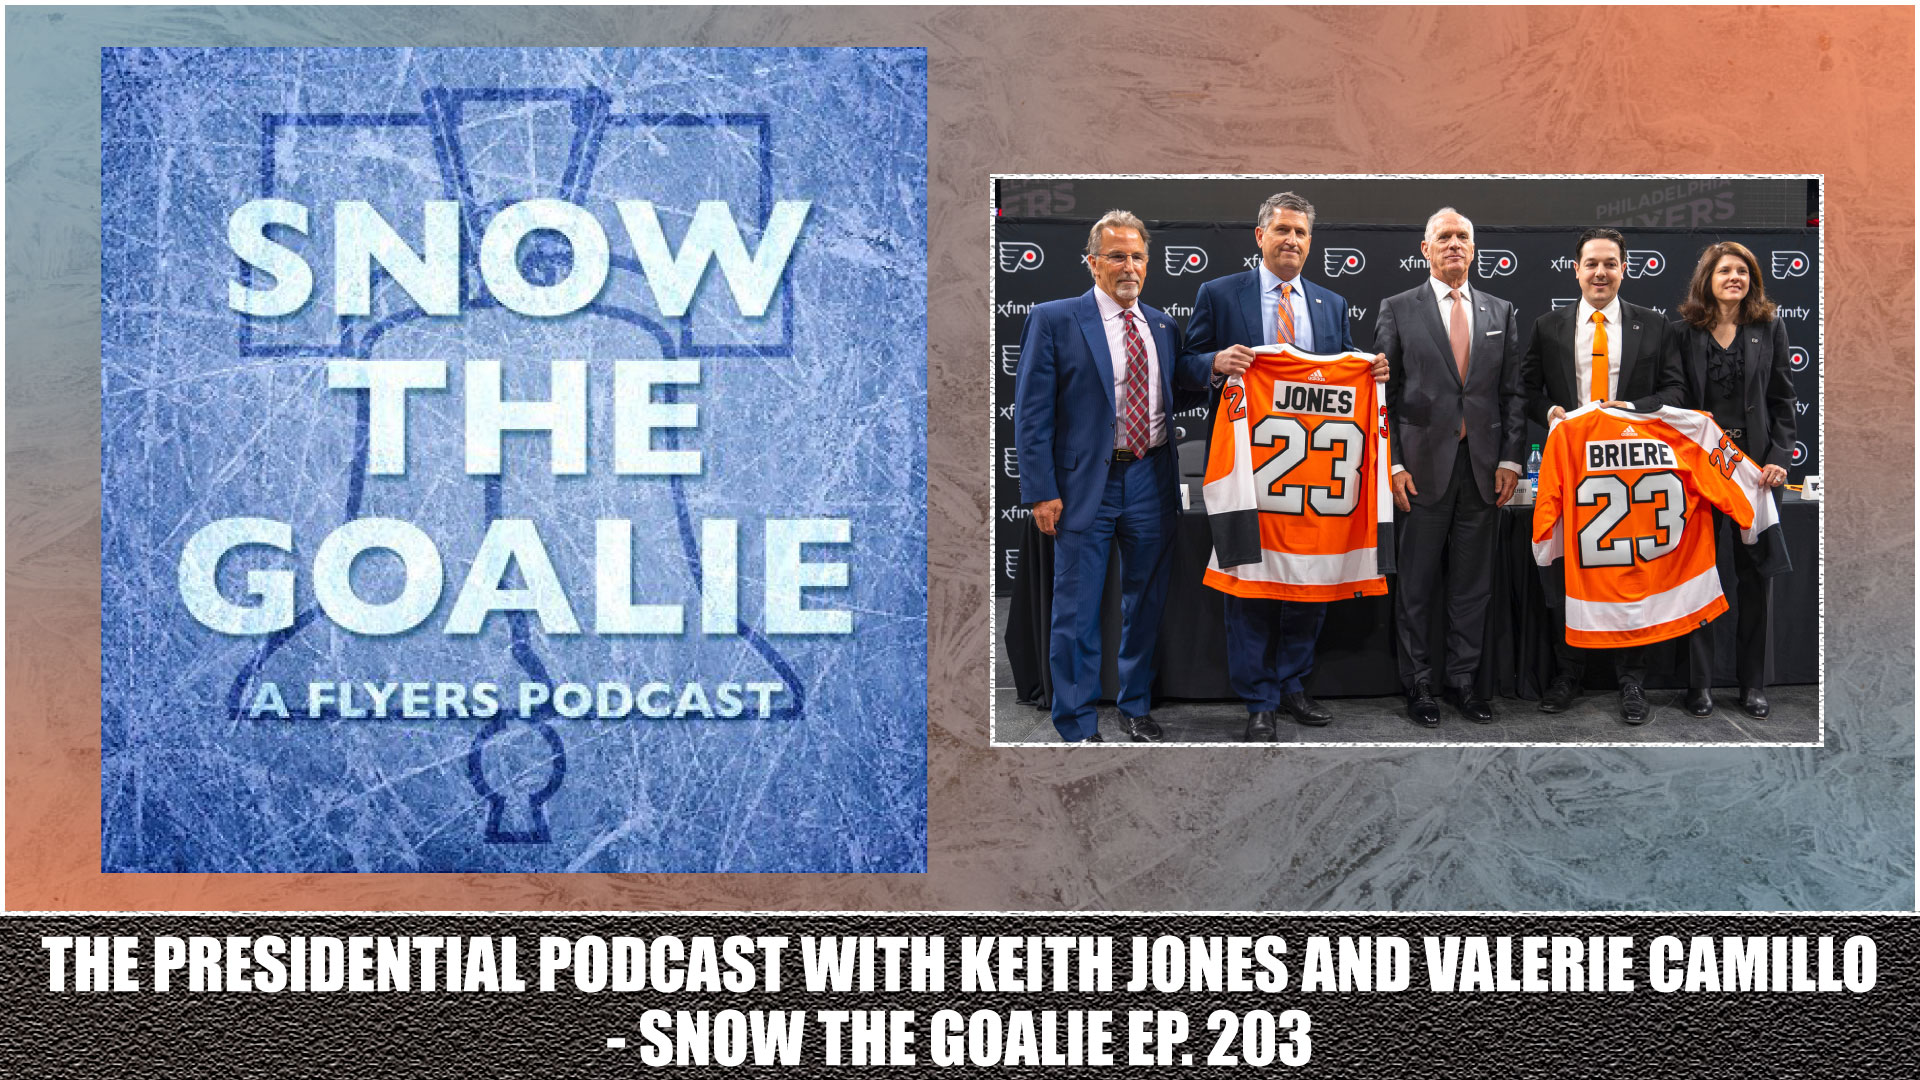 Snow The Goalie: The Presidential Podcast with Keith Jones and Valerie Camillo